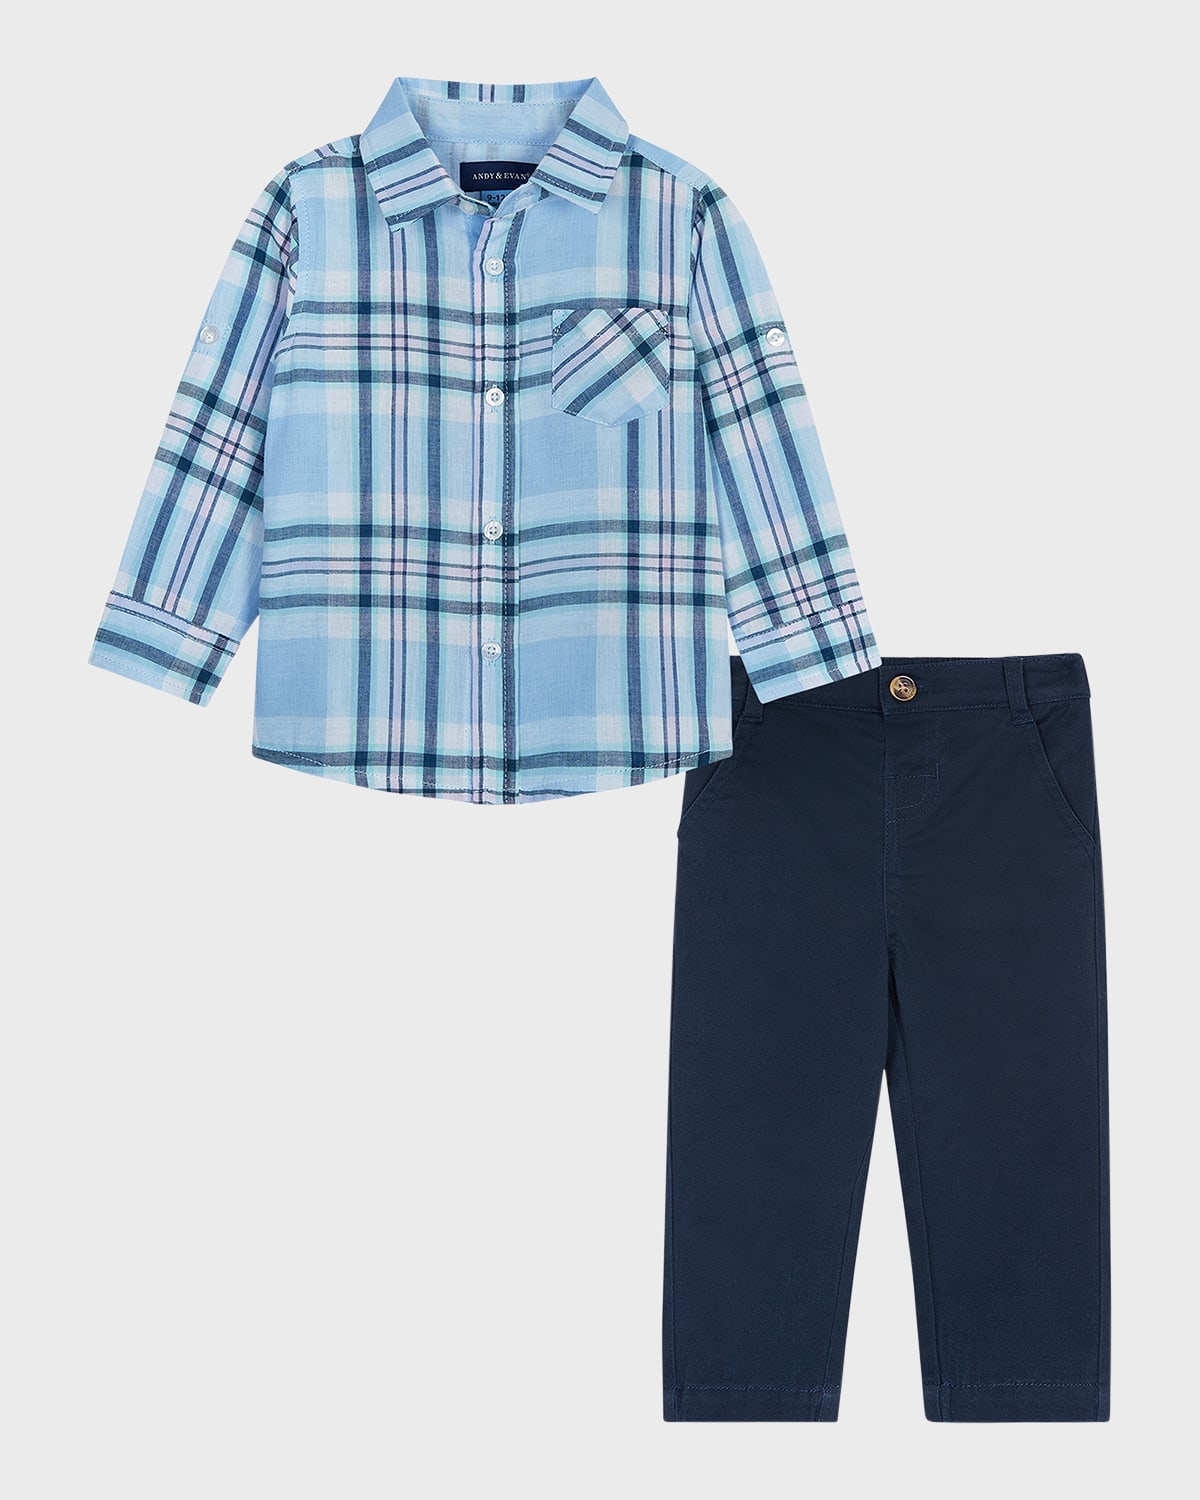 Andy & Evan Kids' Boy's Button Down Shirt W/ Bow Tie And Trousers Set In Lt Blue Plaid